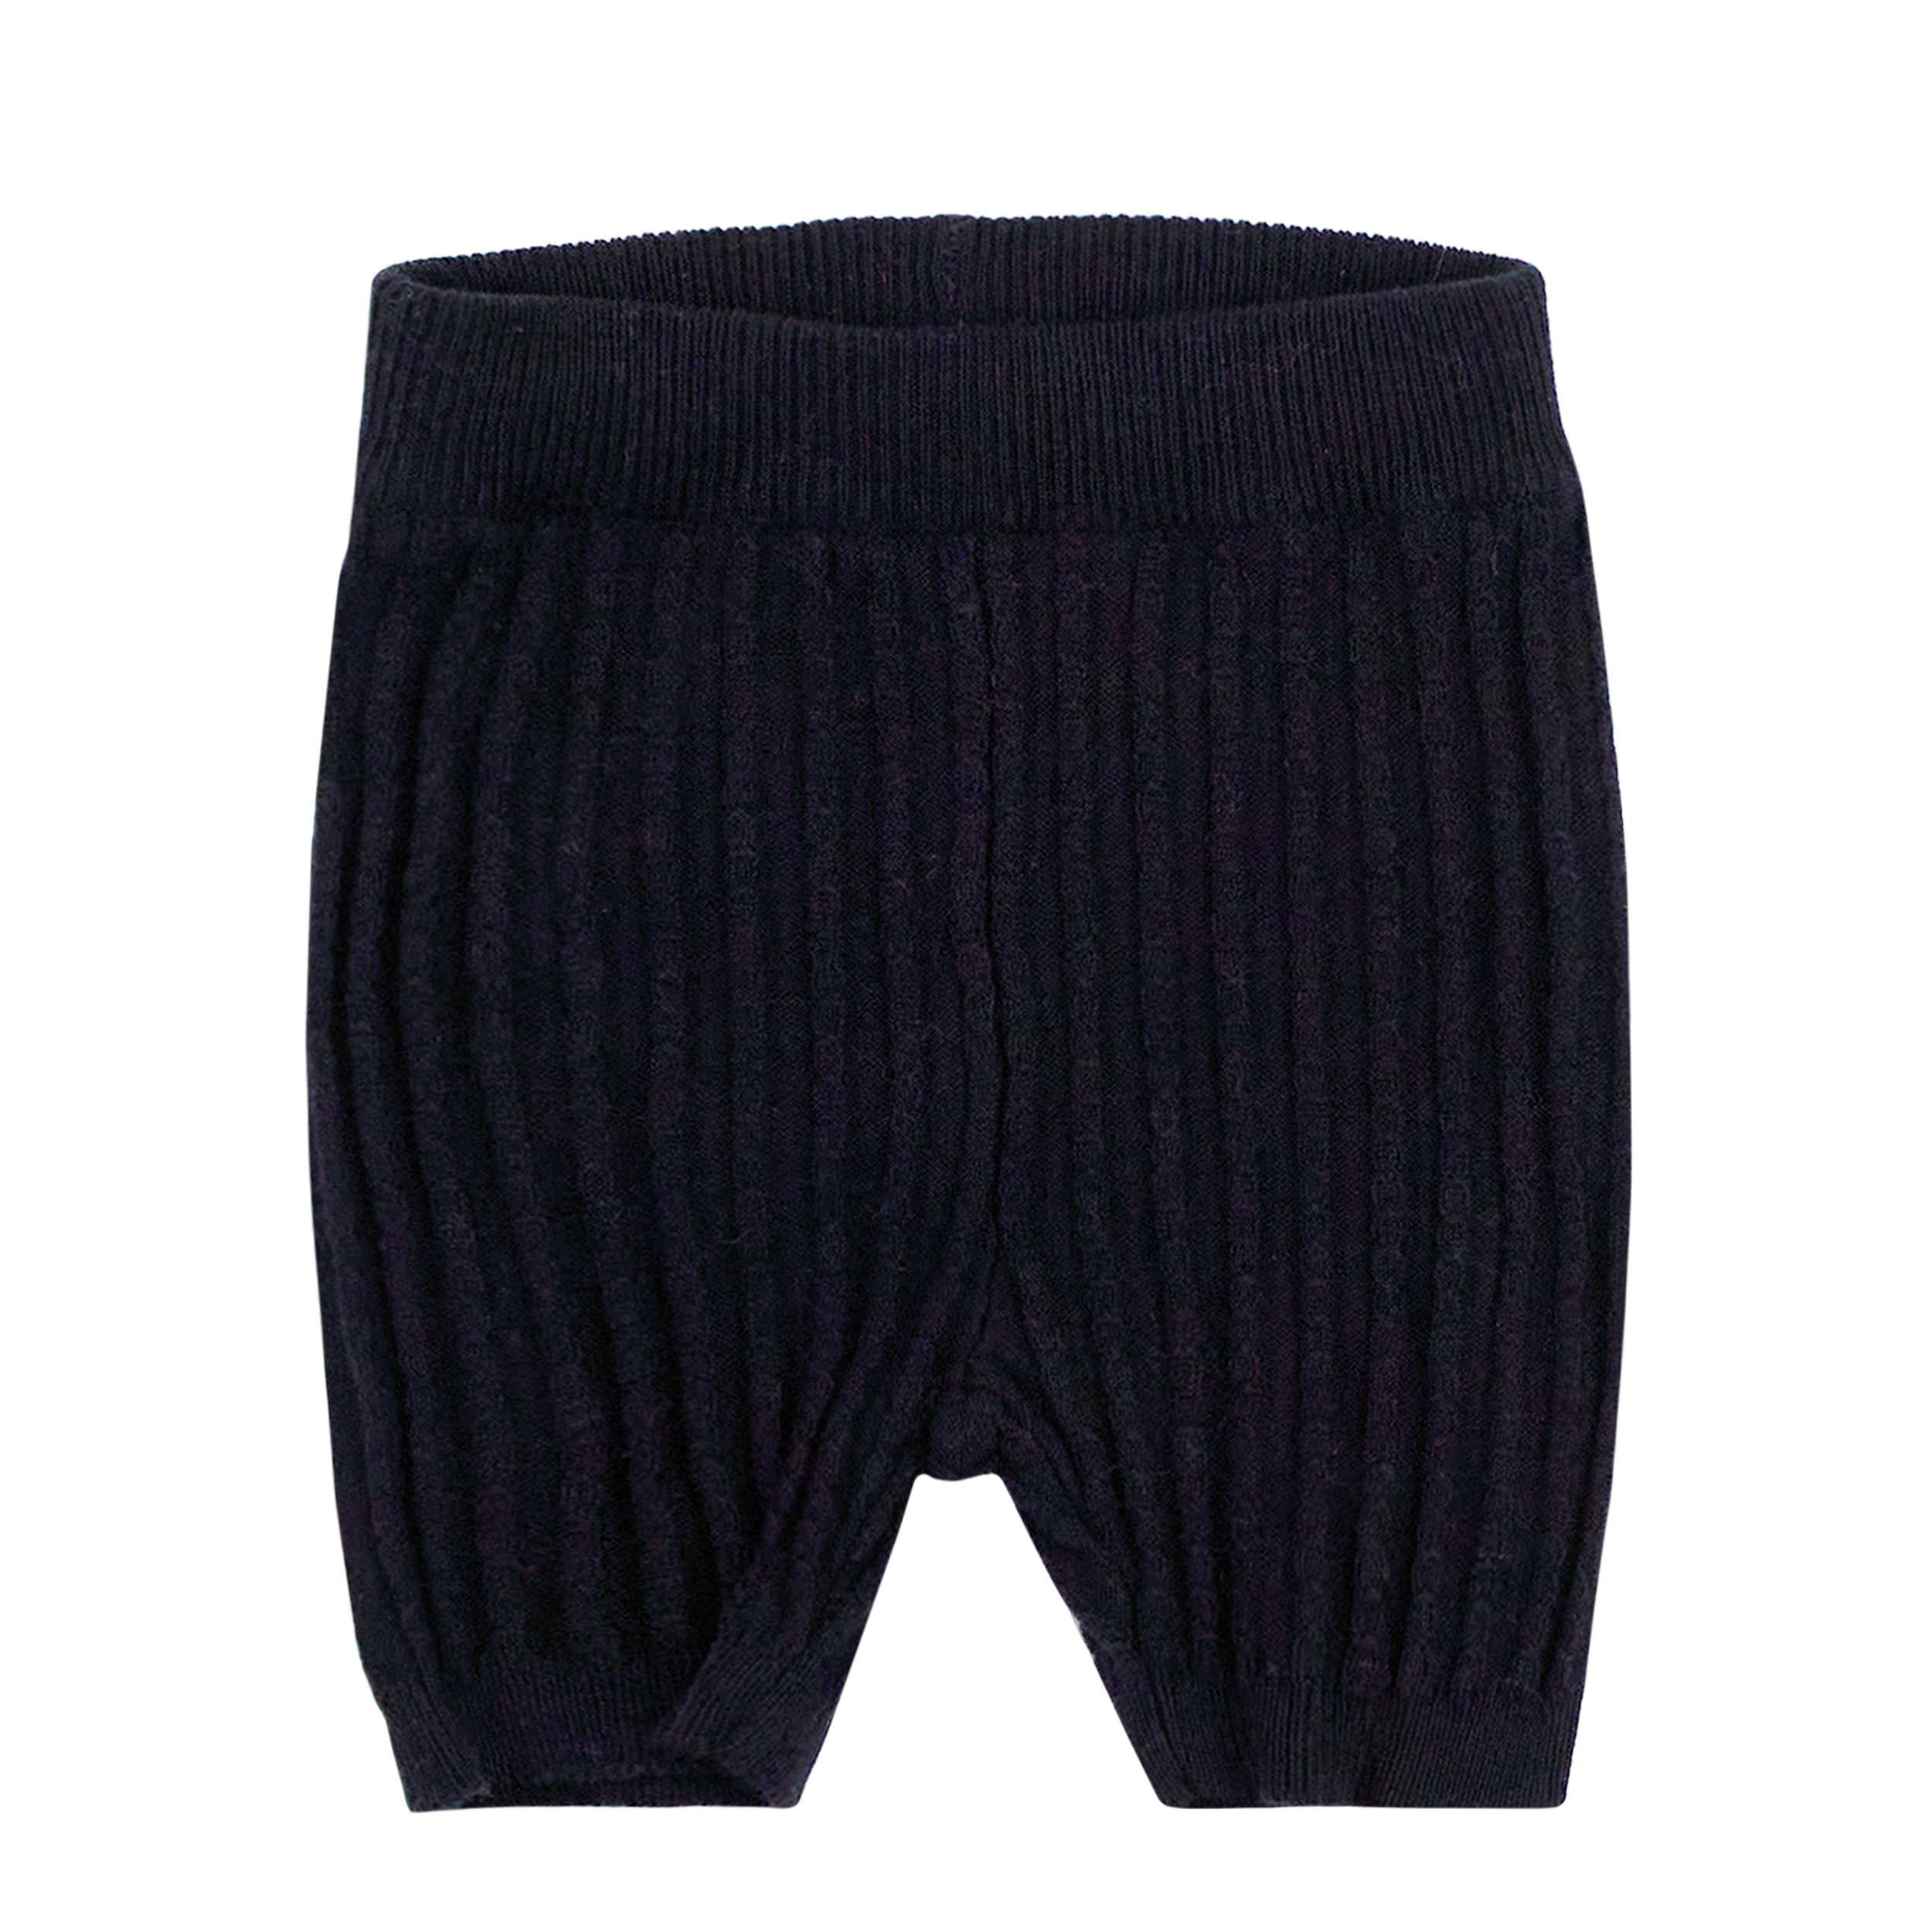 Crew Kids Cable Shorts - Black